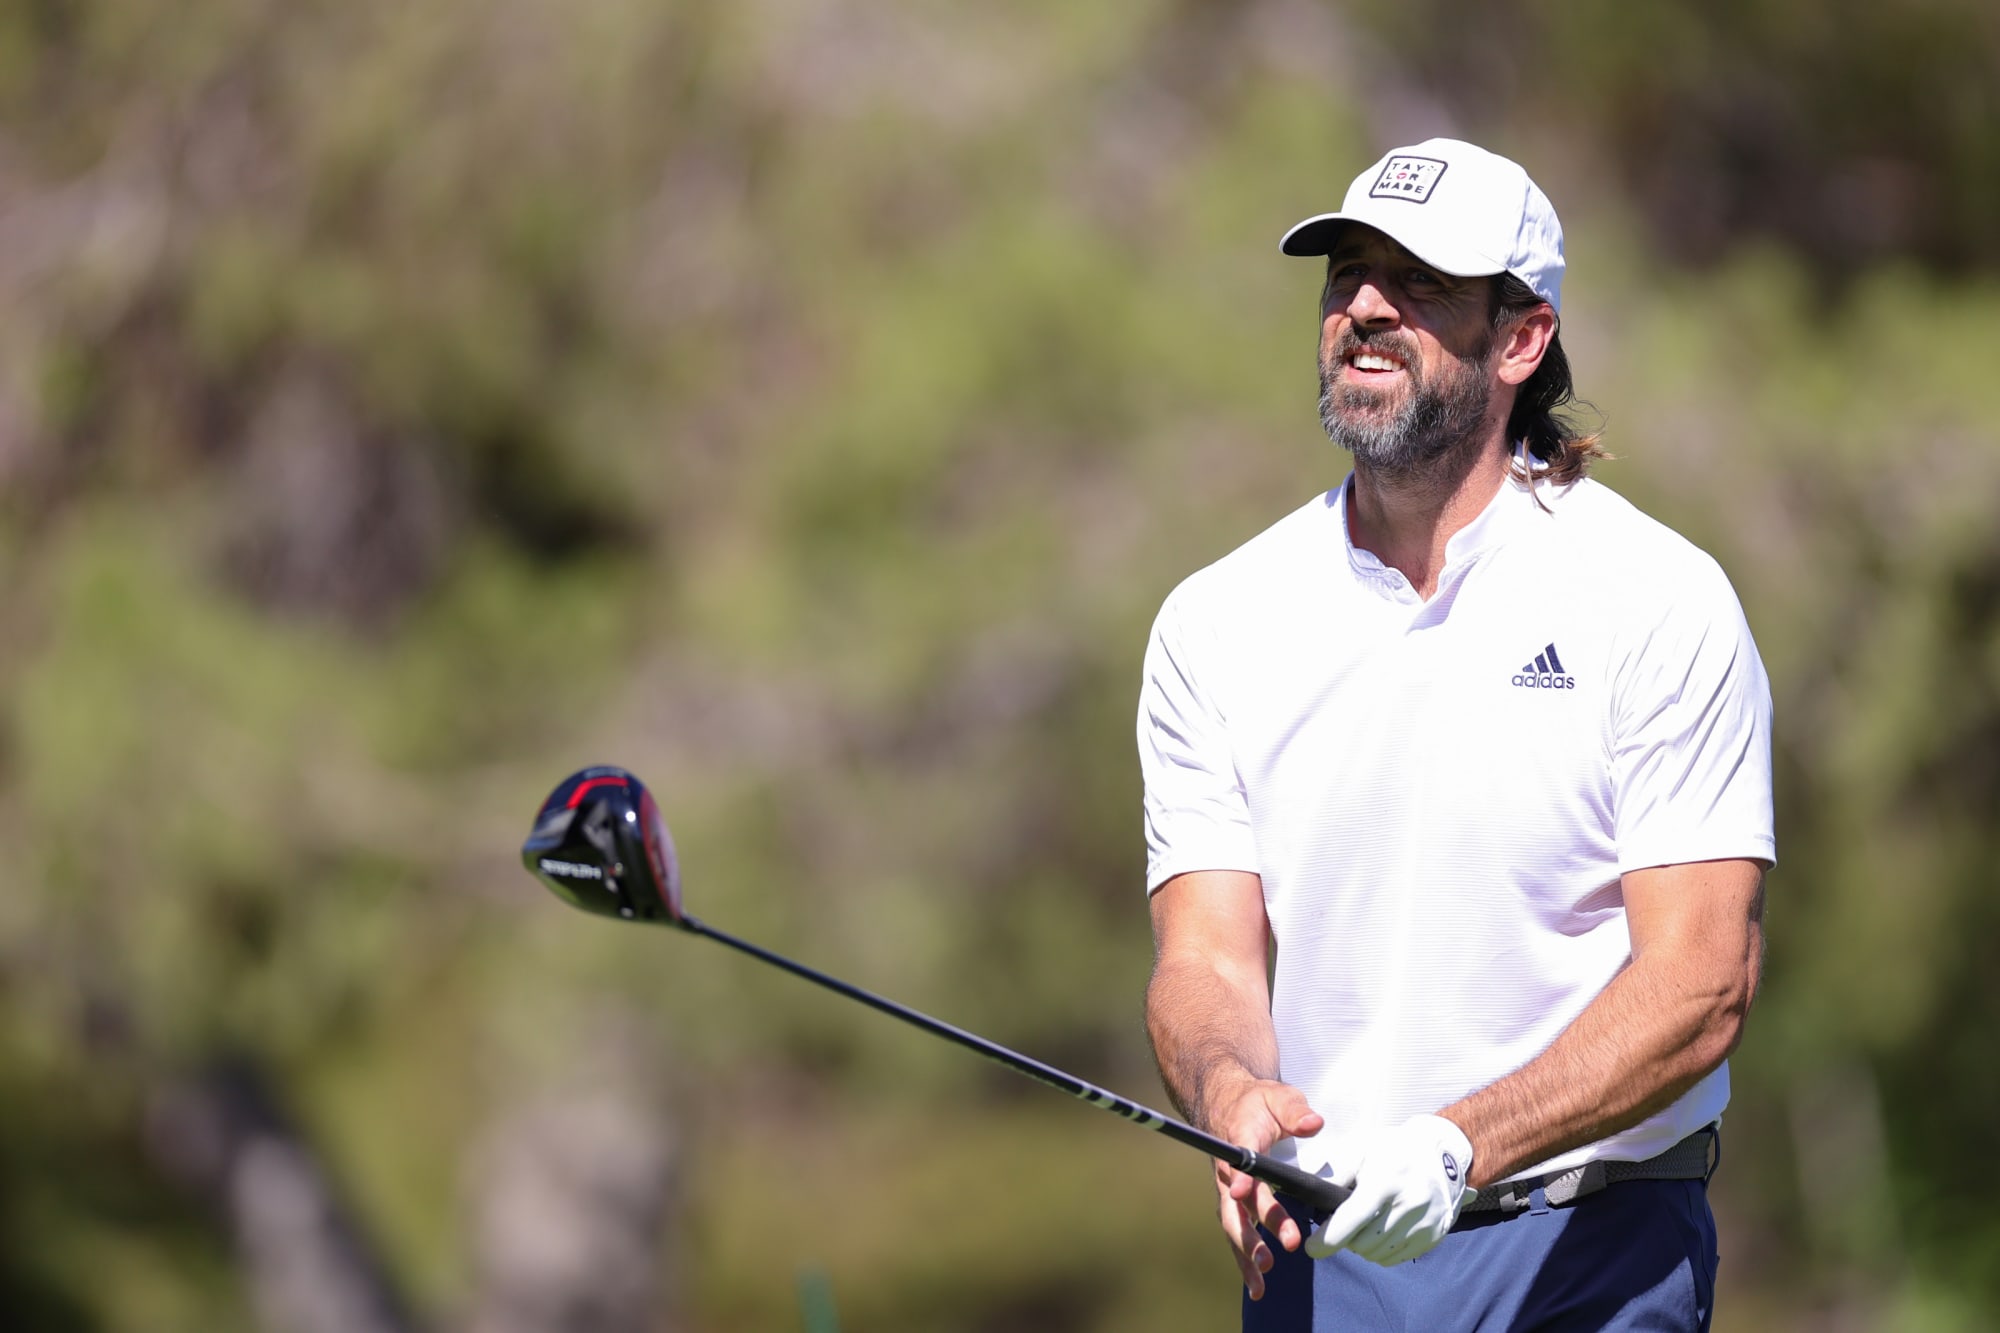 Aaron Rodgers gives fans relatable golf content, cranks drive right into tree